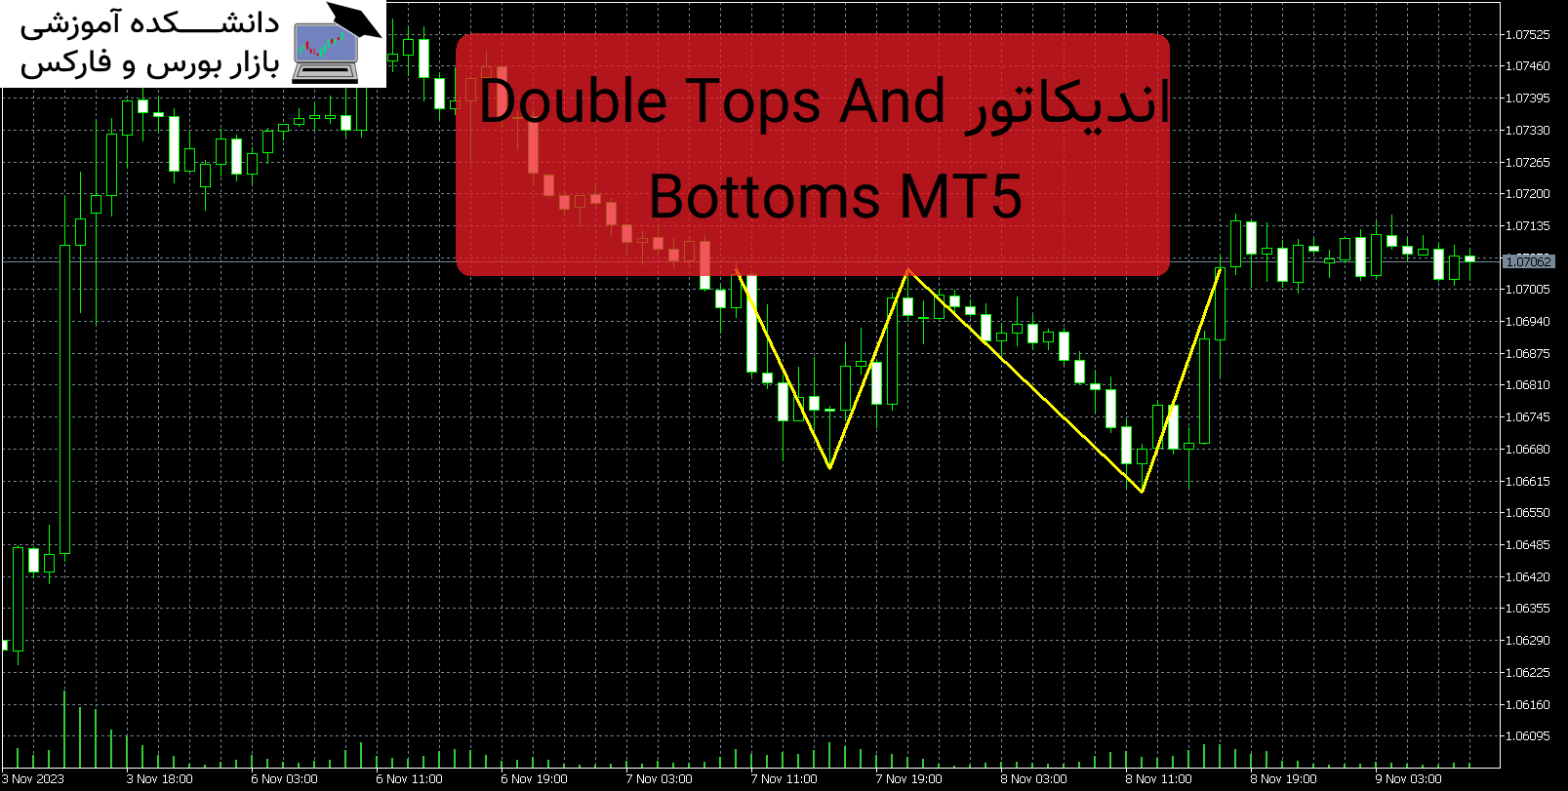 Double Tops And Bottoms MT5 دانلود اندیکاتور